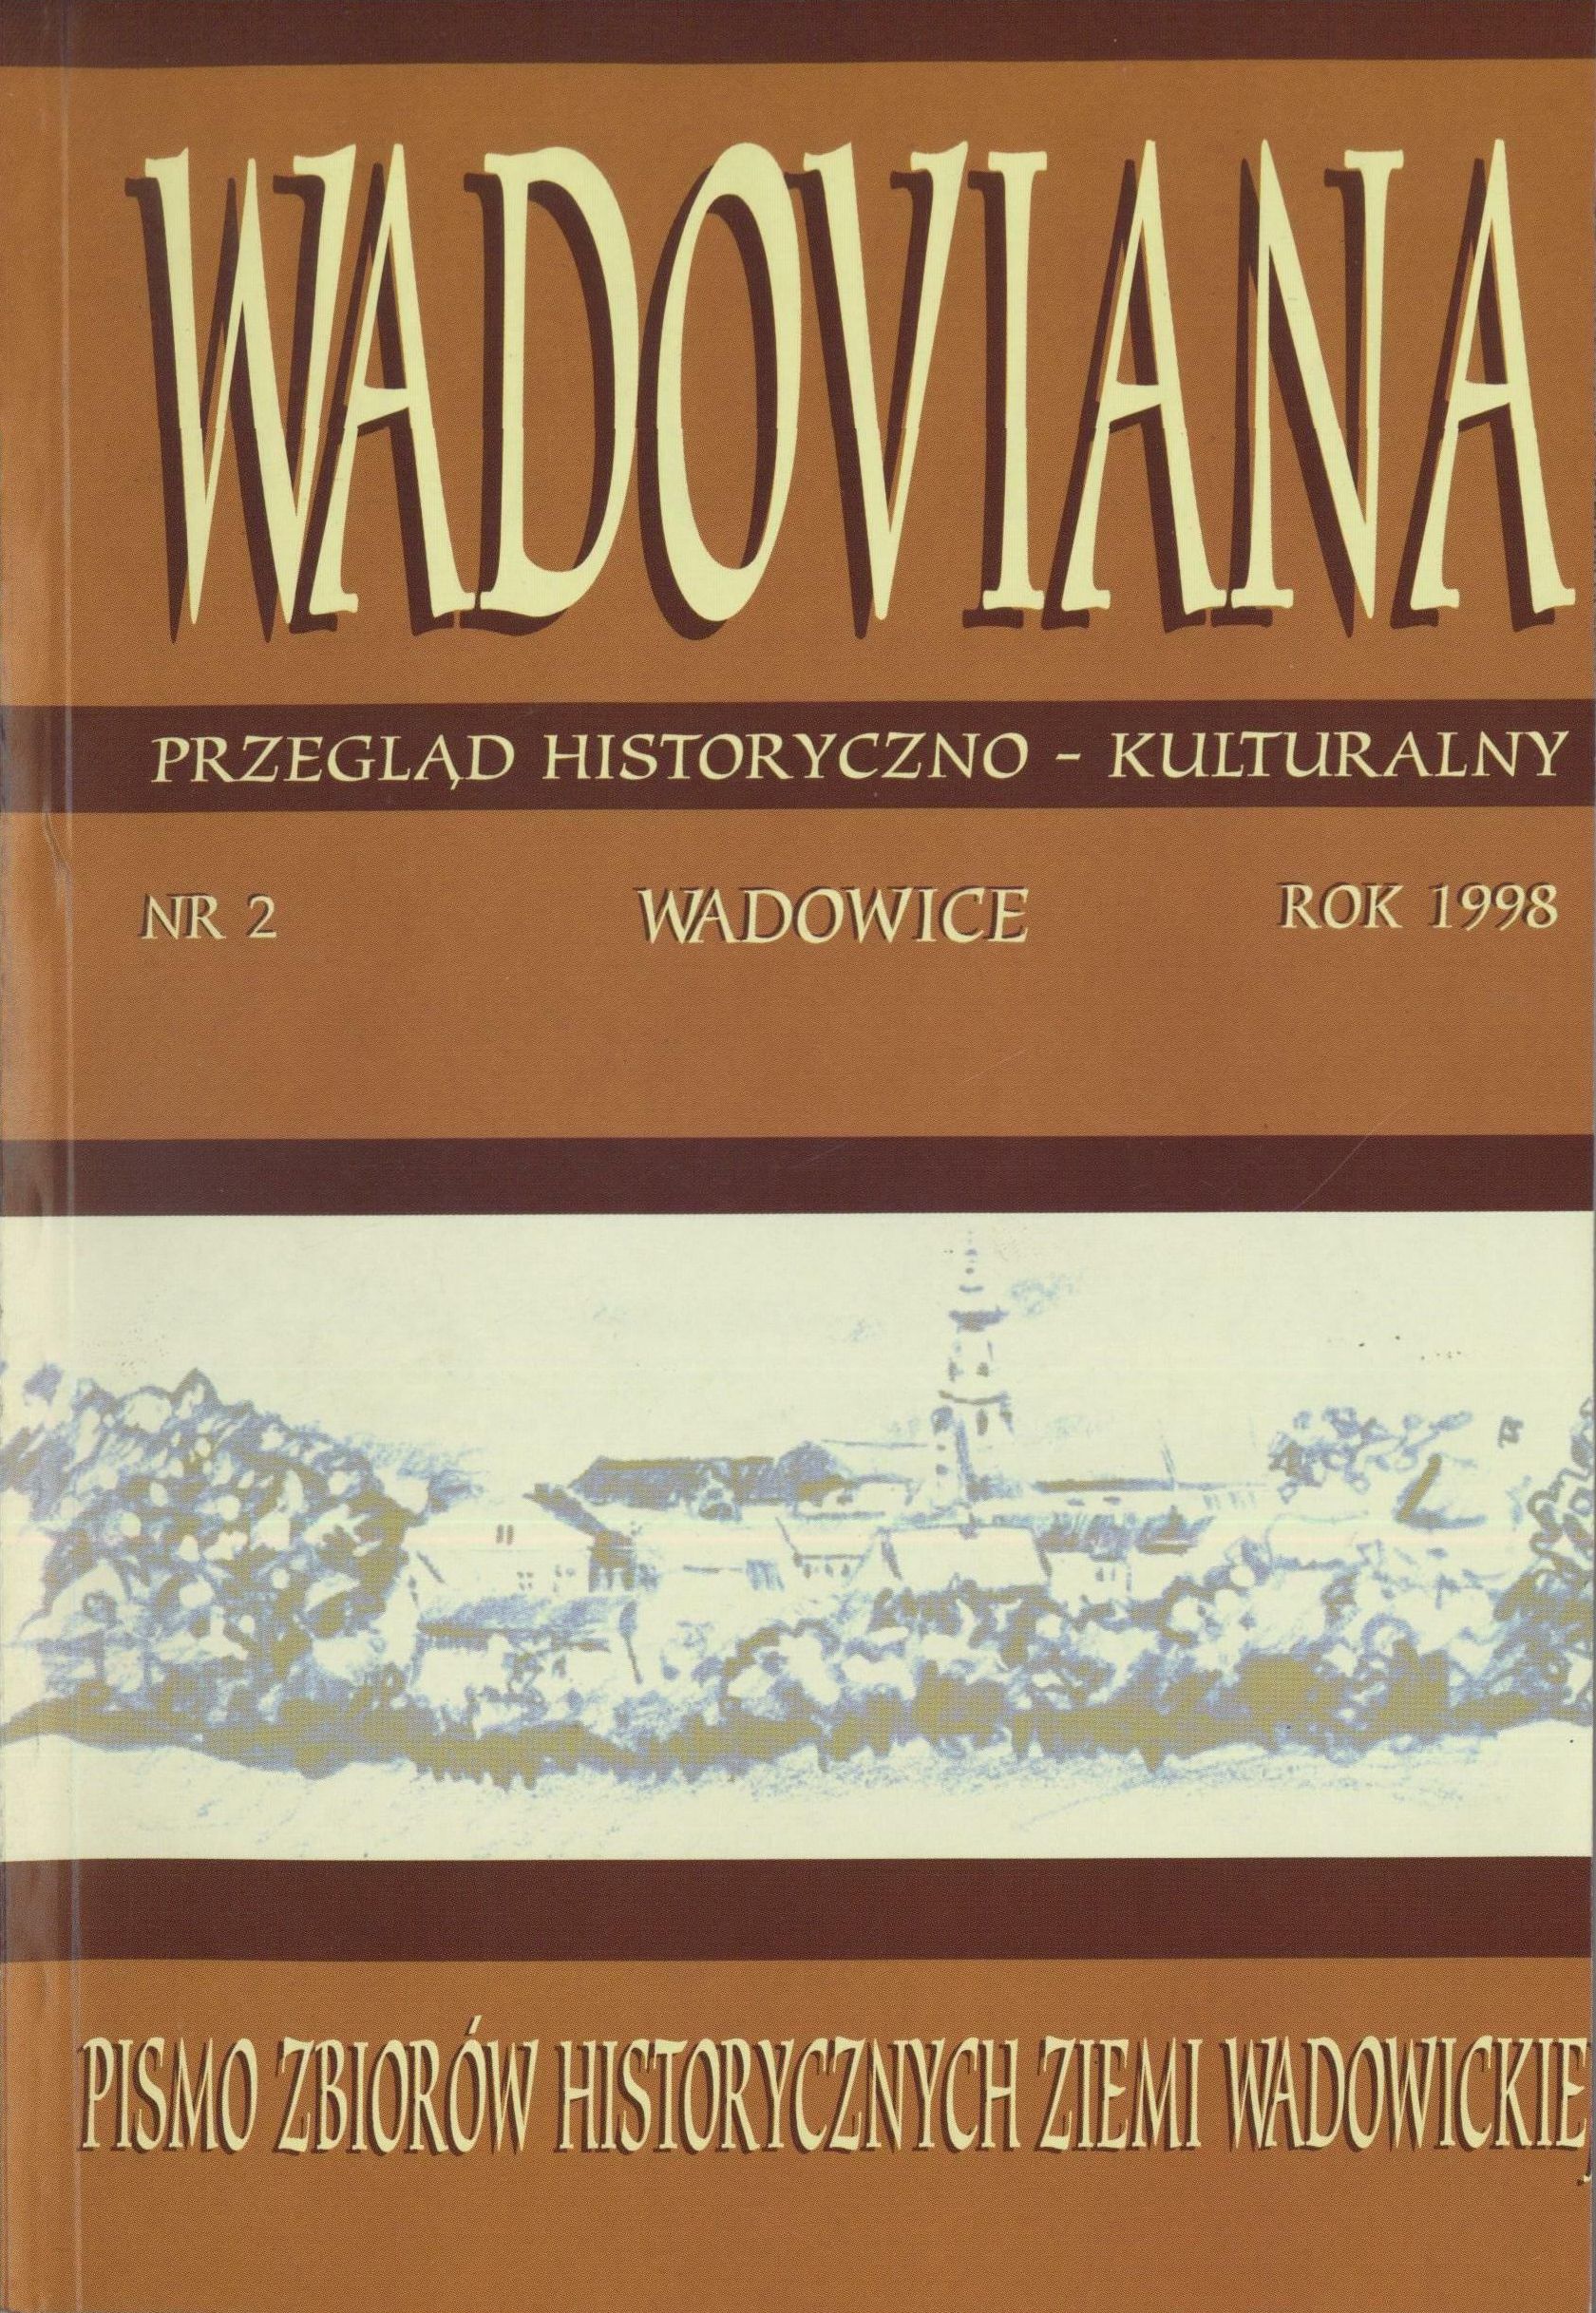 Exhibitions at the museum in Wadowice Cover Image